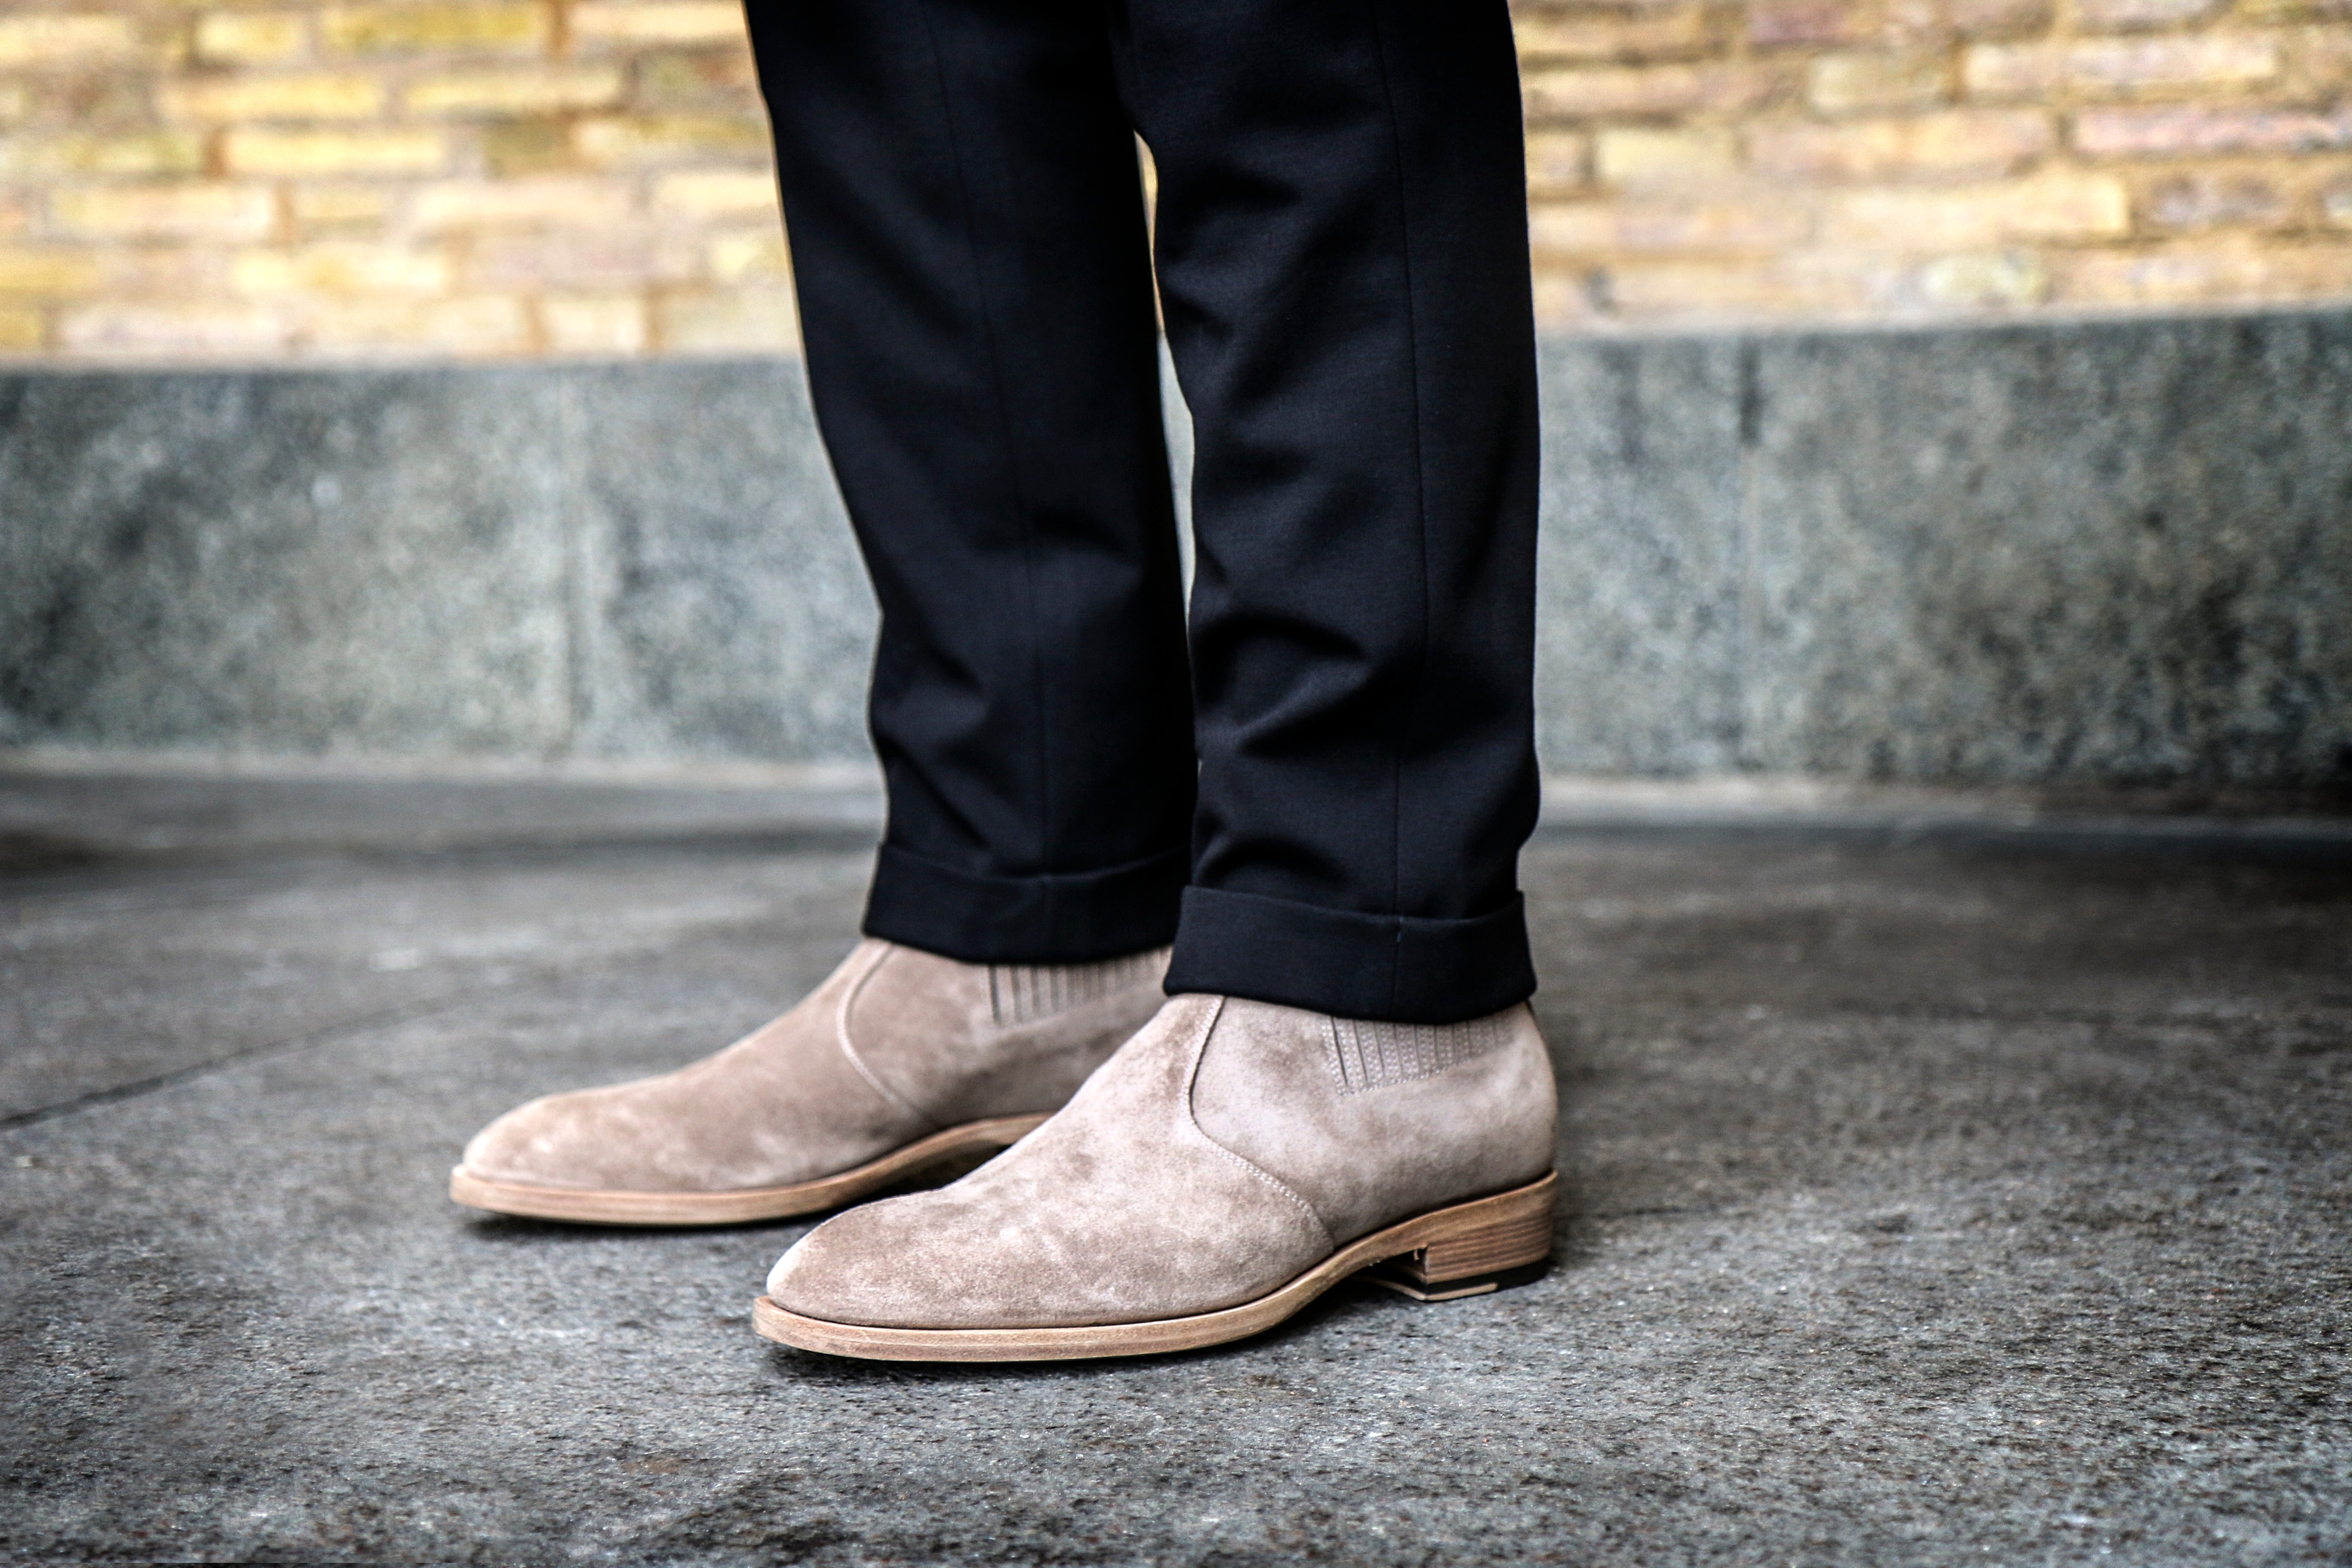 Jay Sand Suede Chelsea Leather Boots